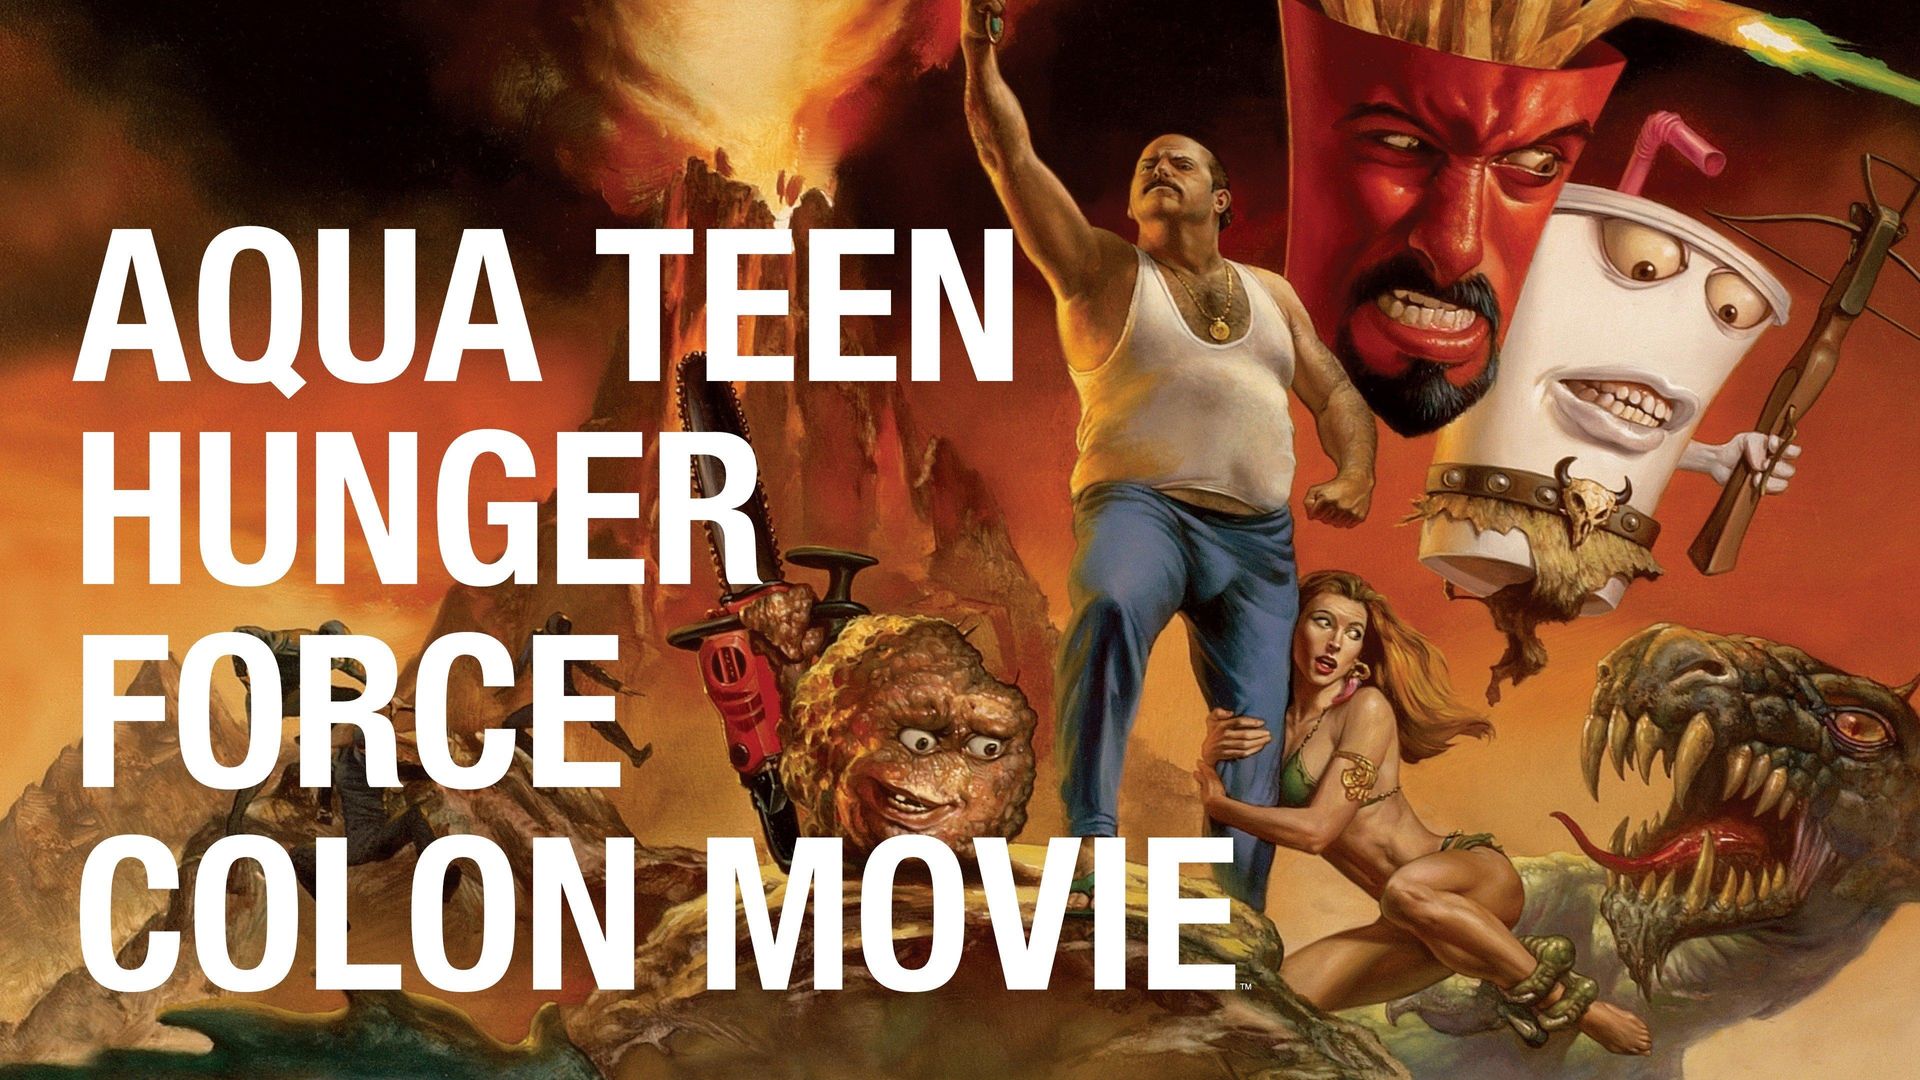 Aqua Teen Hunger Force Colon Movie Film for Theaters Backdrop